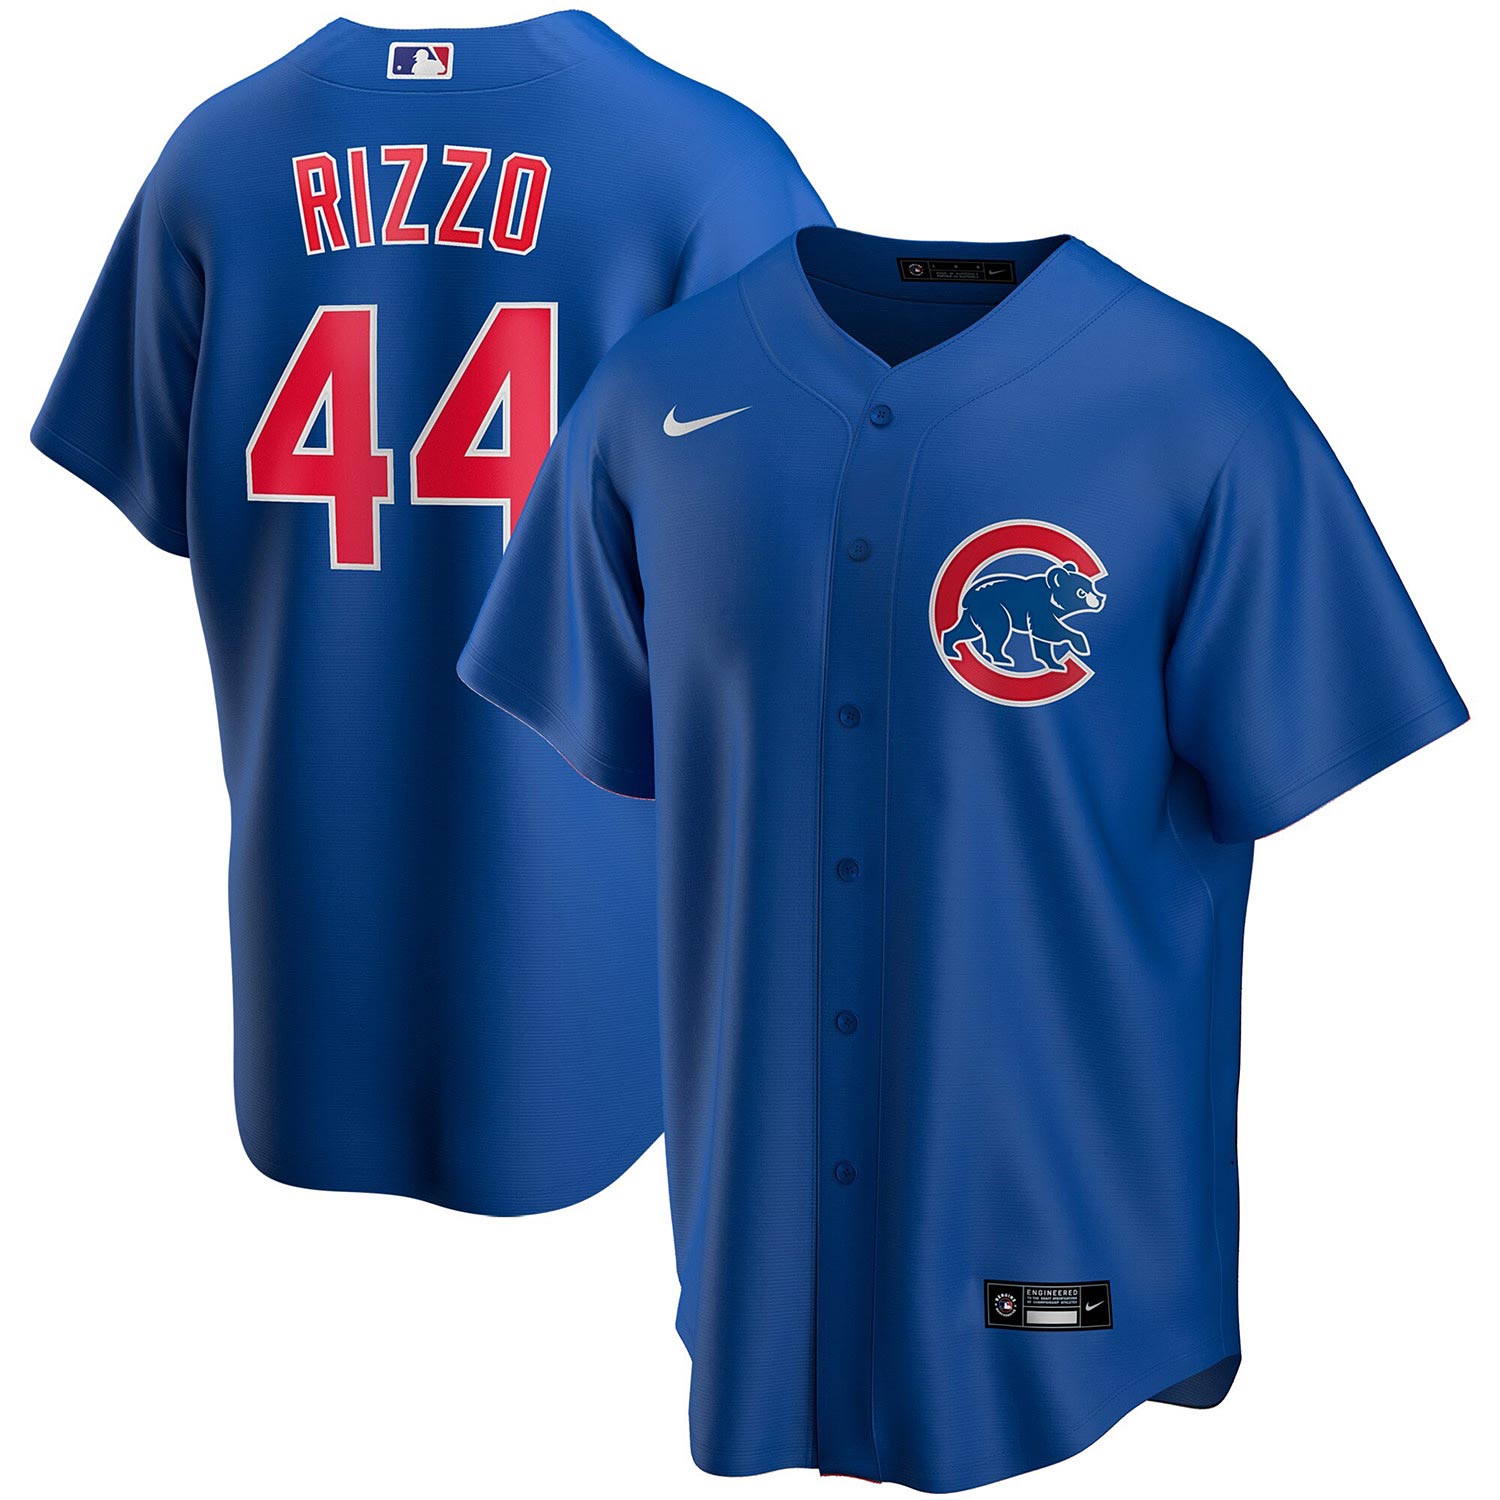 Chicago Cubs Anthony Rizzo Youth Nike Home Twill Player Finished Replica Jersey with Authentic Lettering X-Large = 18-20